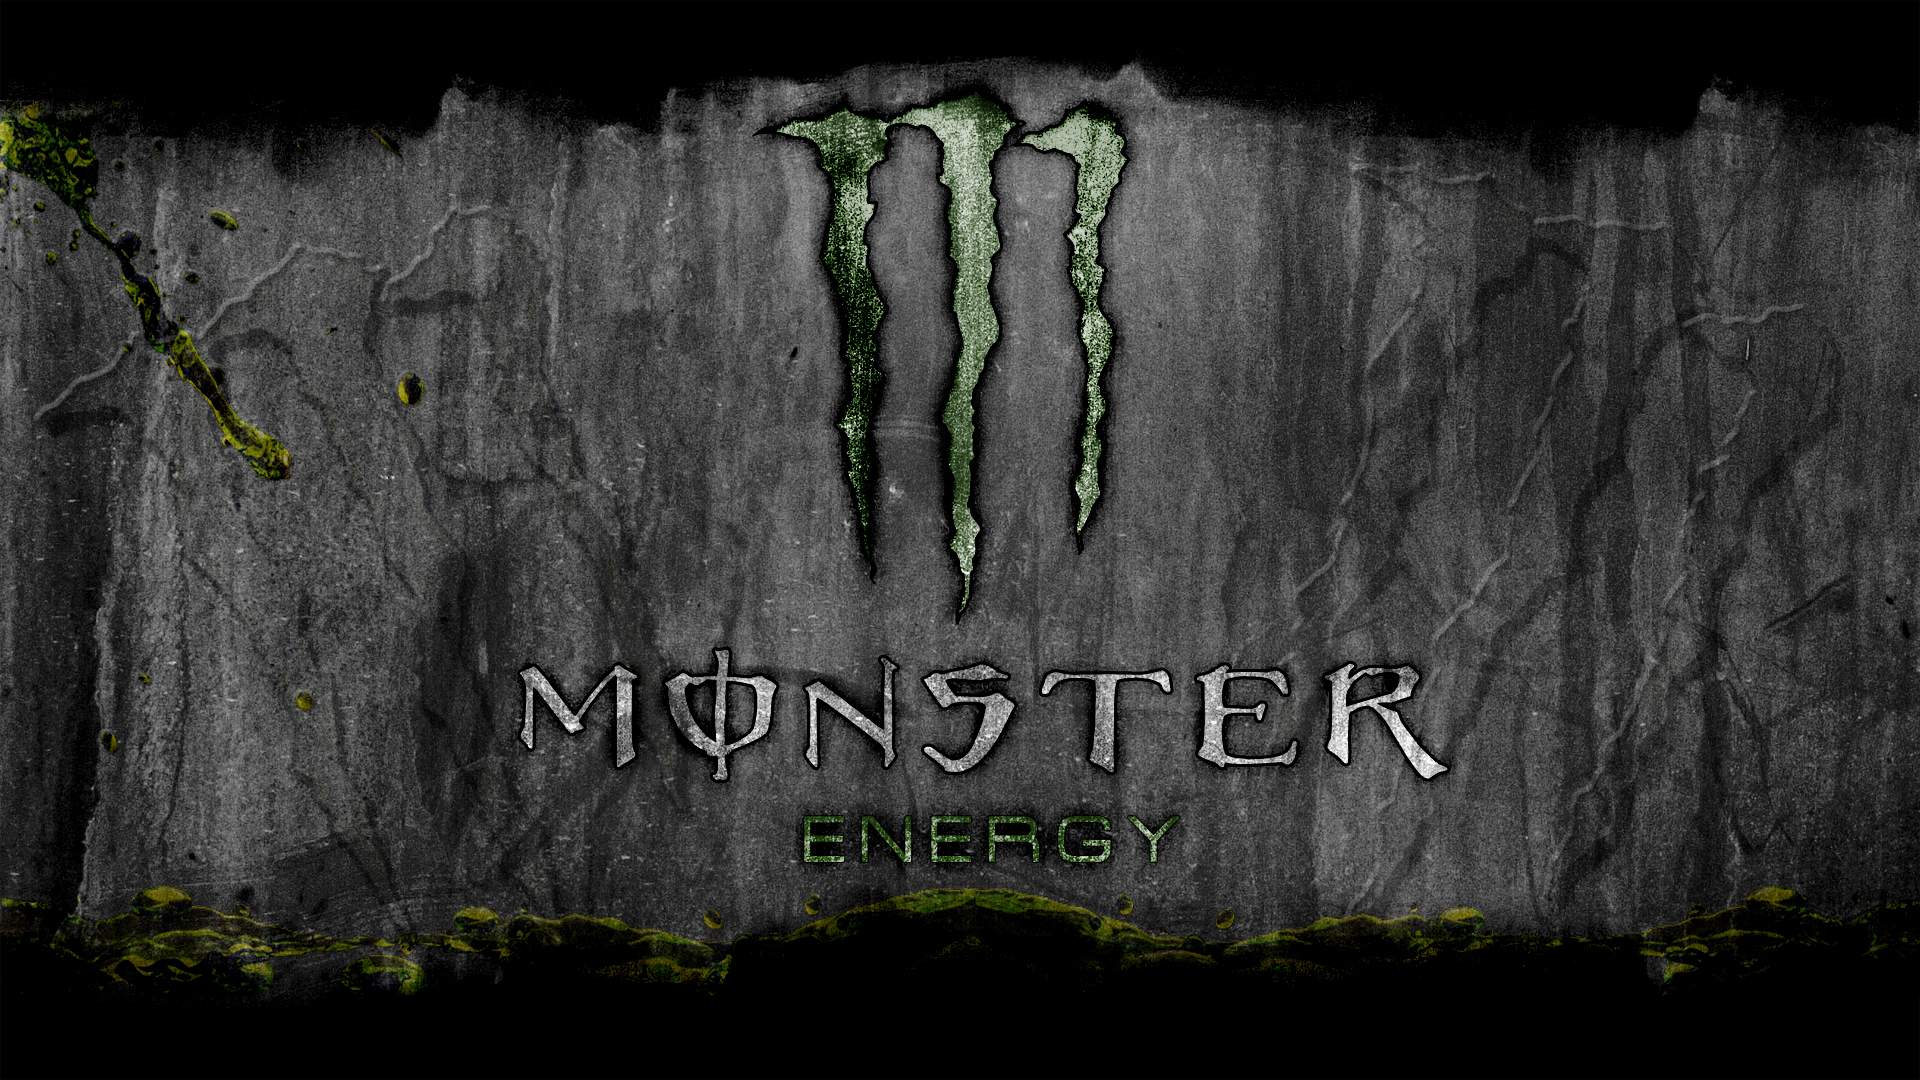 Free Download Image Monster Energy Wallpaper Hd Wallpapers De Taringa Pc Android 19x1080 For Your Desktop Mobile Tablet Explore 49 Monster Energy Wallpaper For Android Best Phone Wallpaper Android